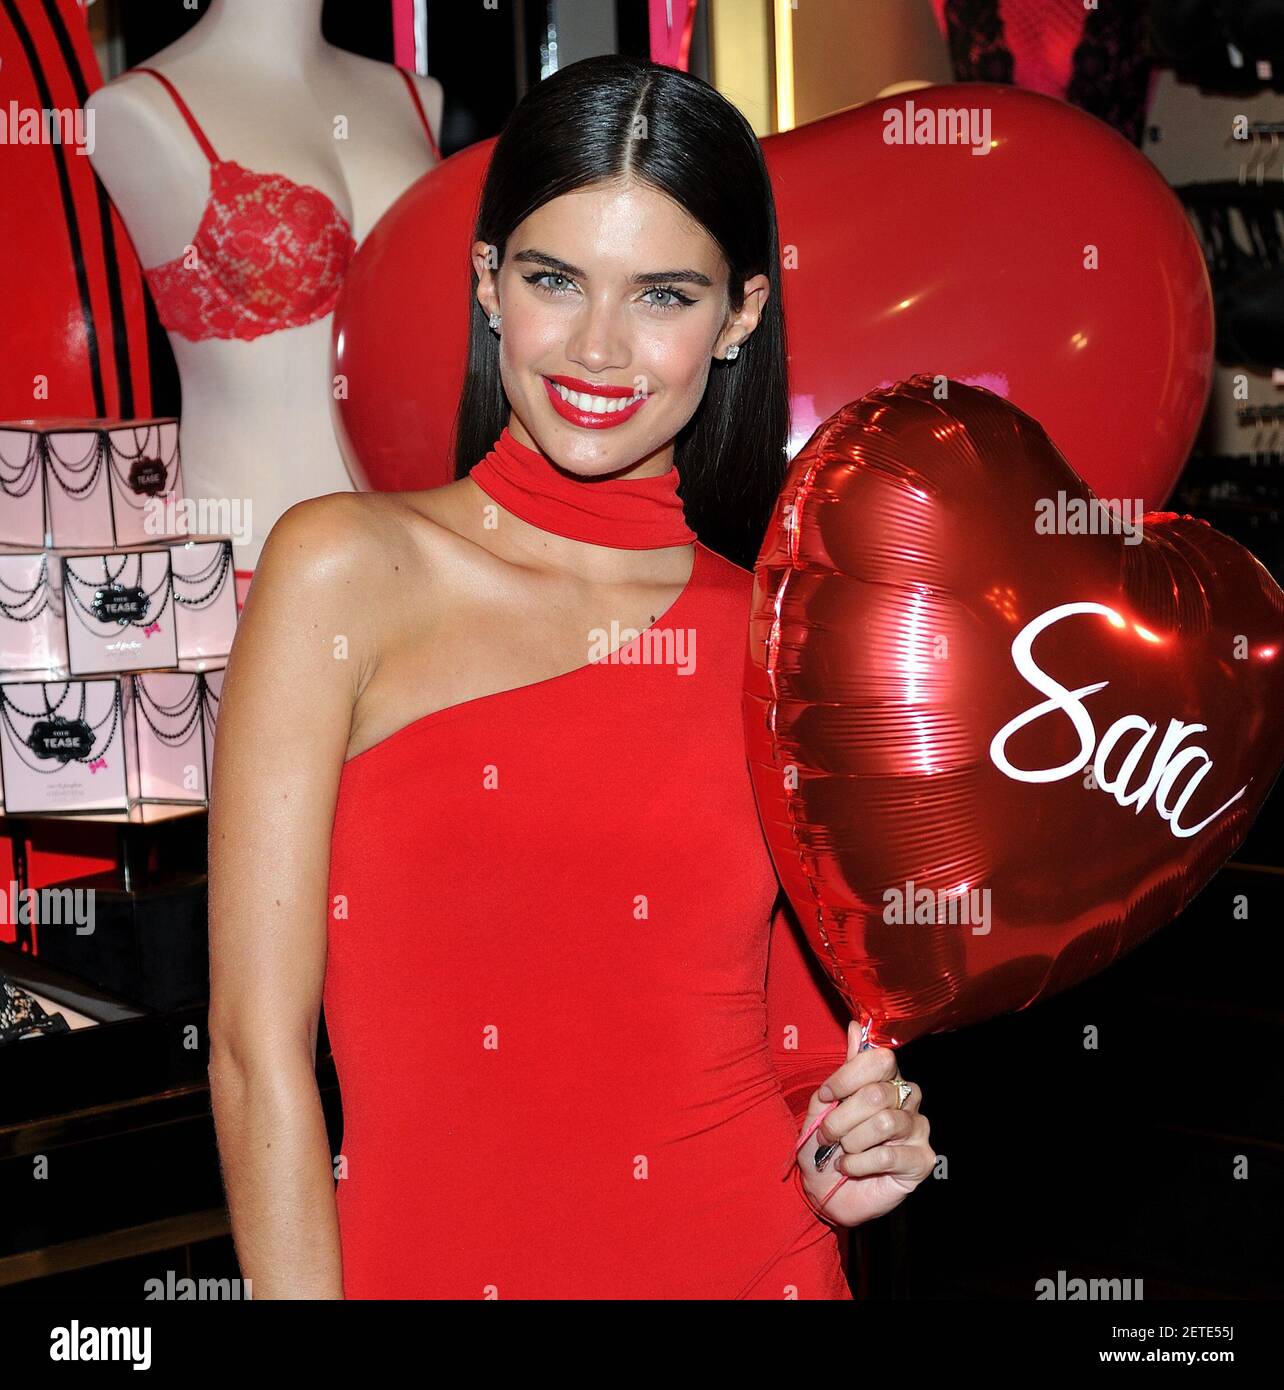 Model Sara Sampaio celebrates Valentine's Day at an appearance at the ...